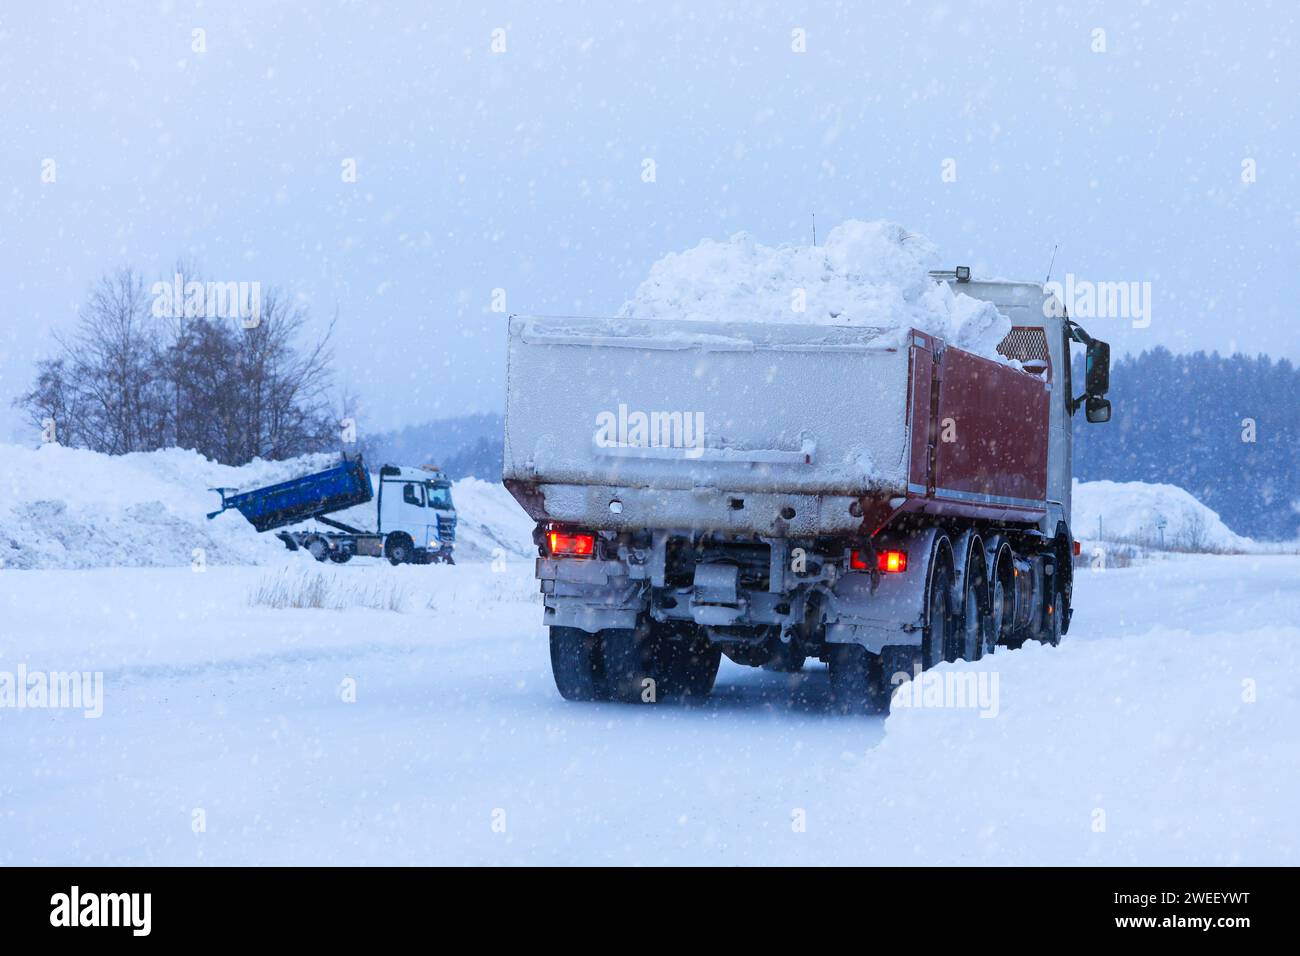 Tipper truck transporting a load of cleared snow away from town to snow dump in winter snowfall, rear view. In distance, another truck unloading. Stock Photo